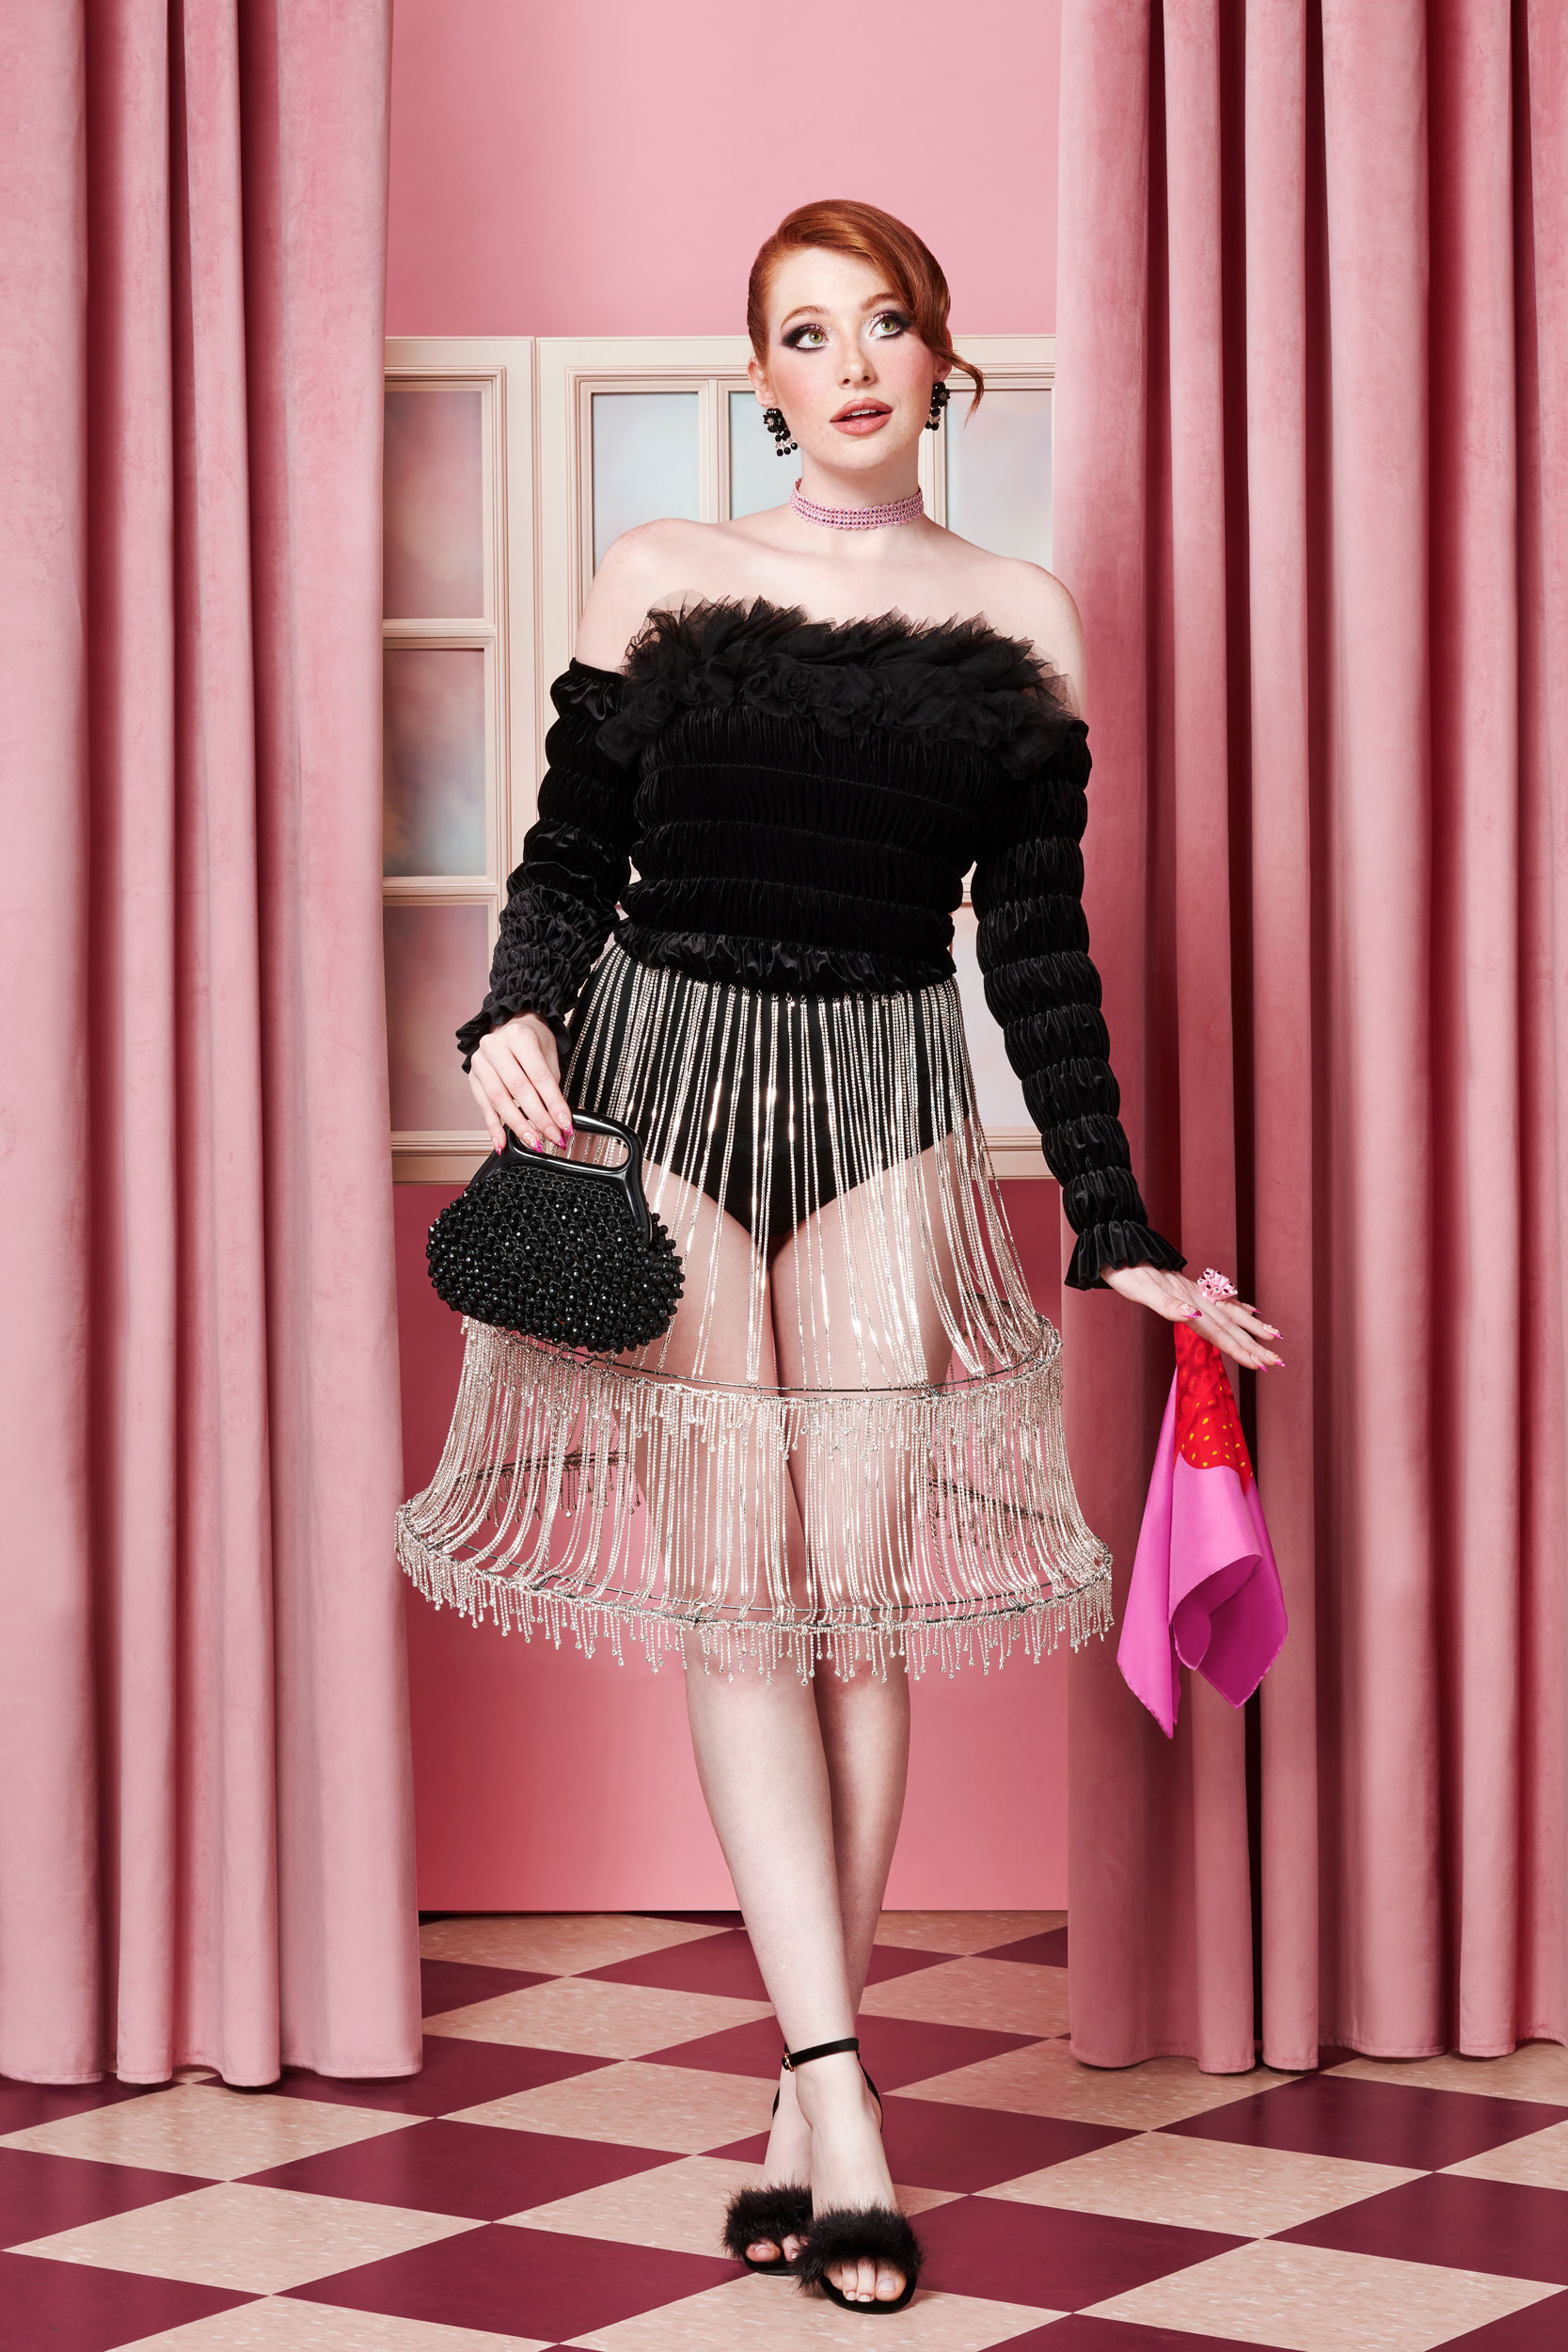 Red-haired model styled in black, ruffled bodysuit and chandelier-style hoop skirt with purse and scarf inspired by Barbie